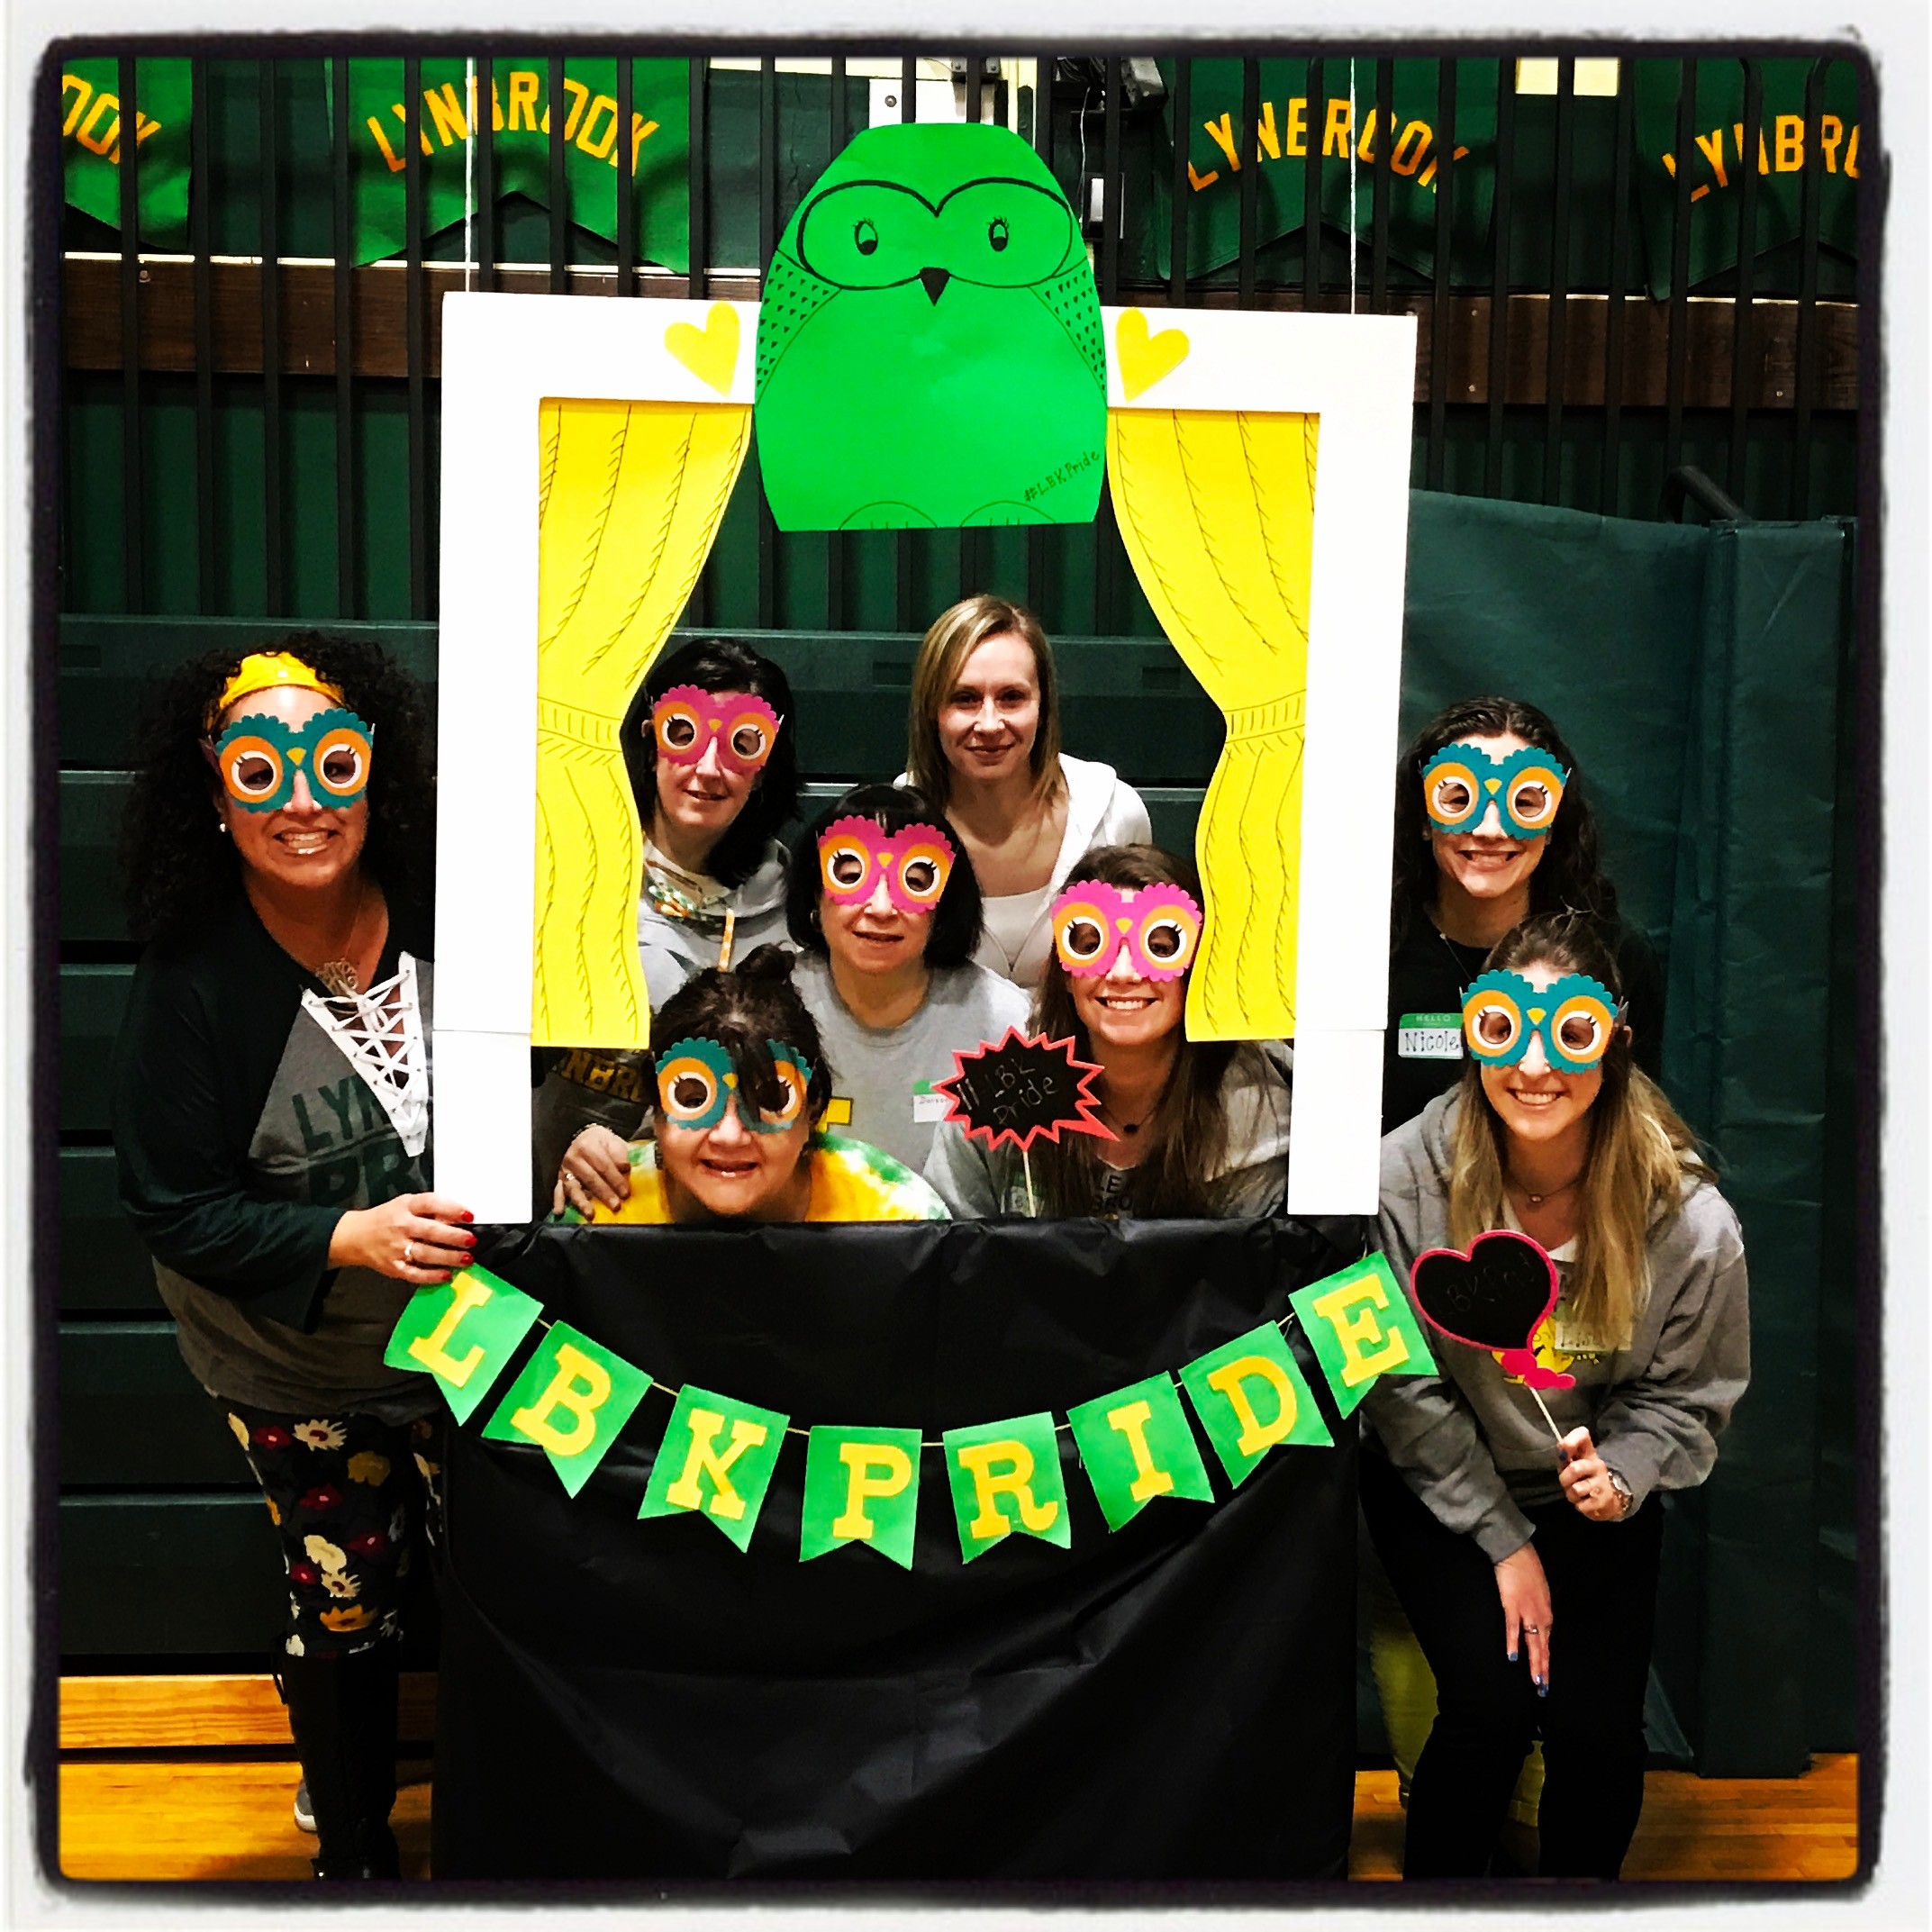 Teachers from Marion Street School showed their school pride by donning Owl eyes for photos at the seminar.